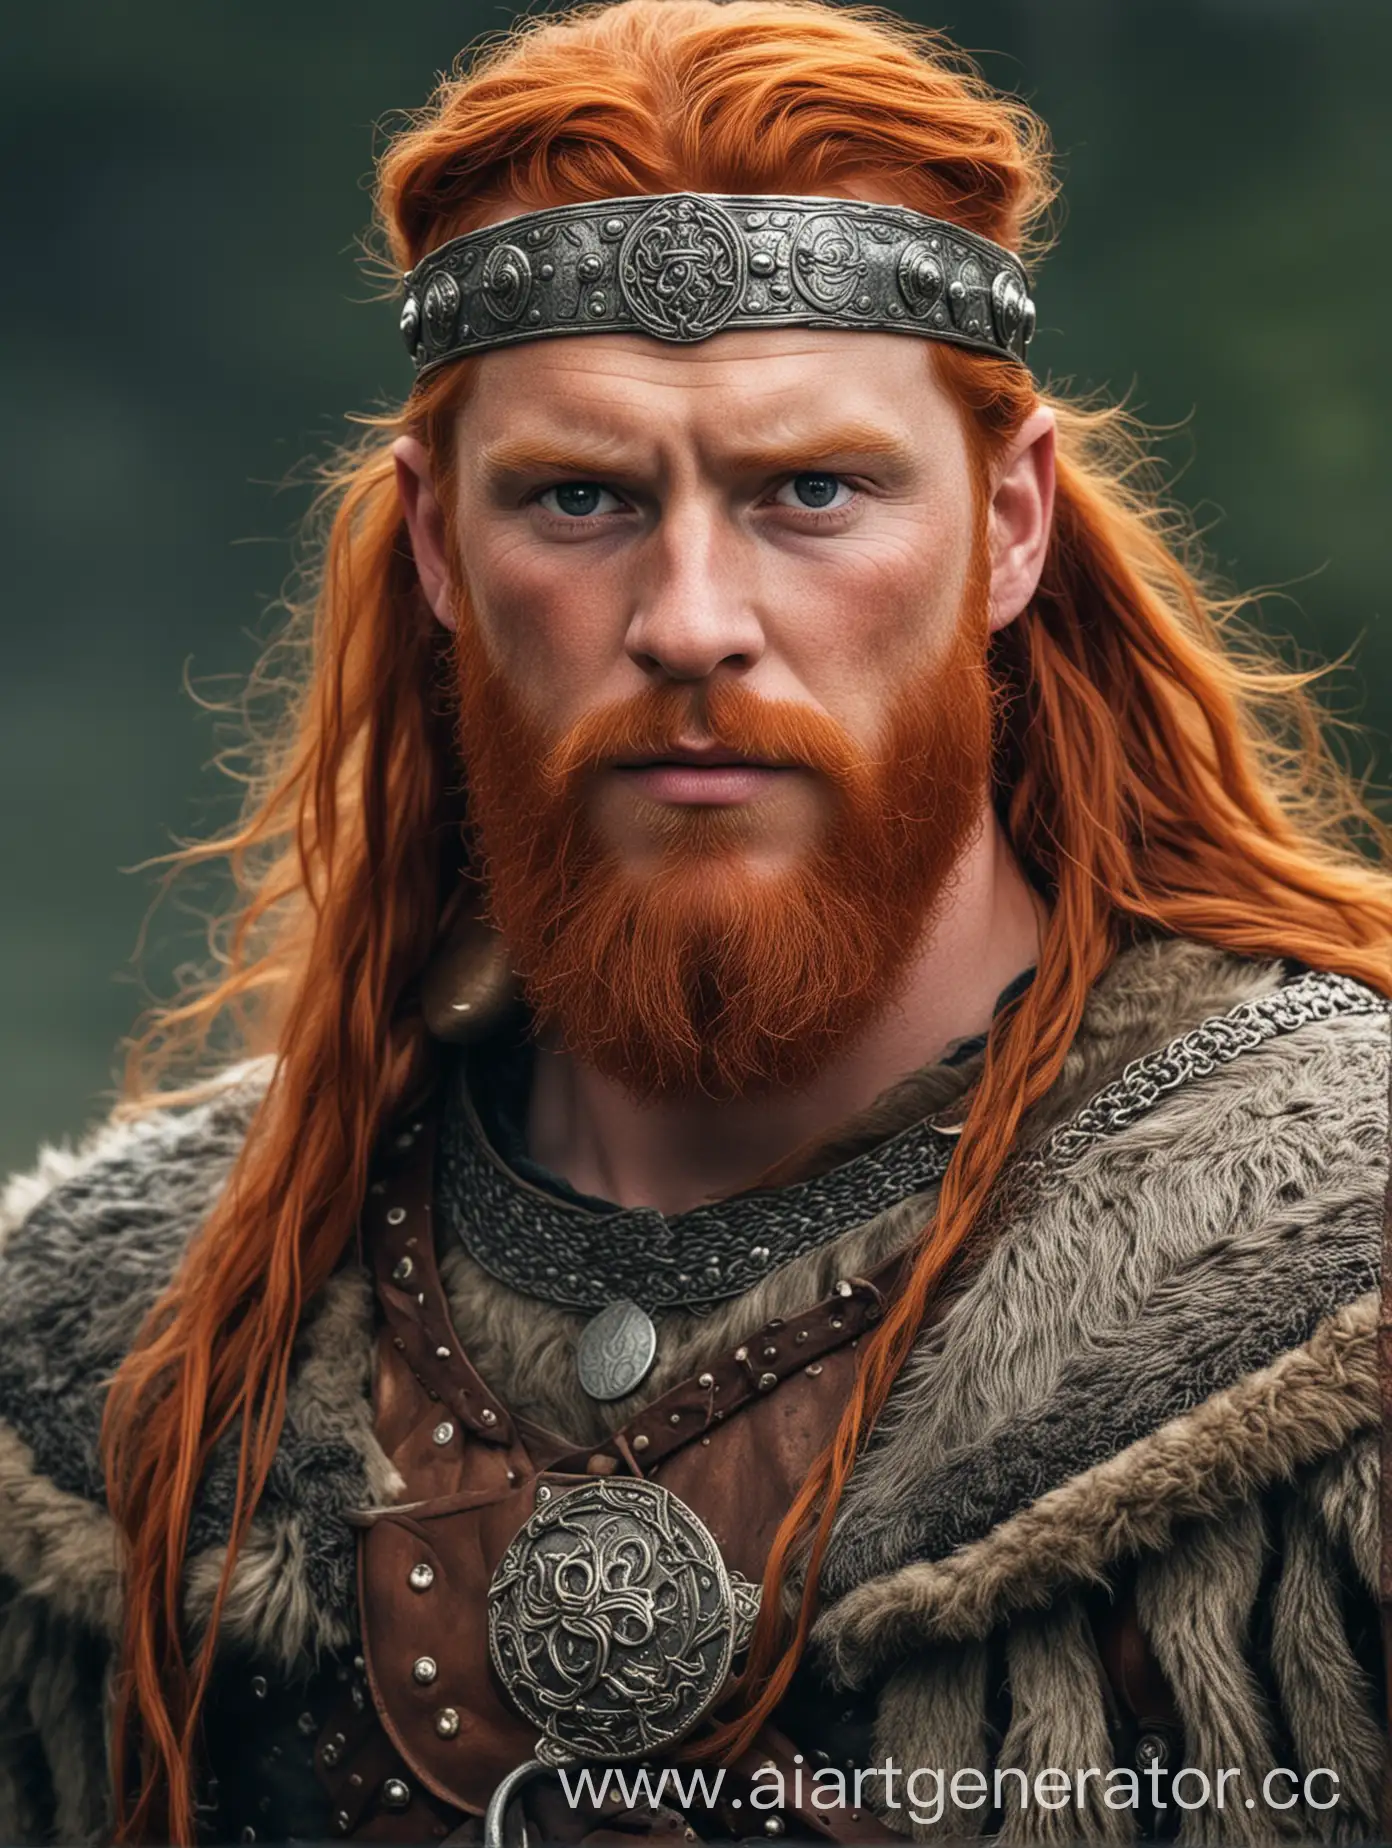 King, the mighty red-haired Viking, in rich attire.